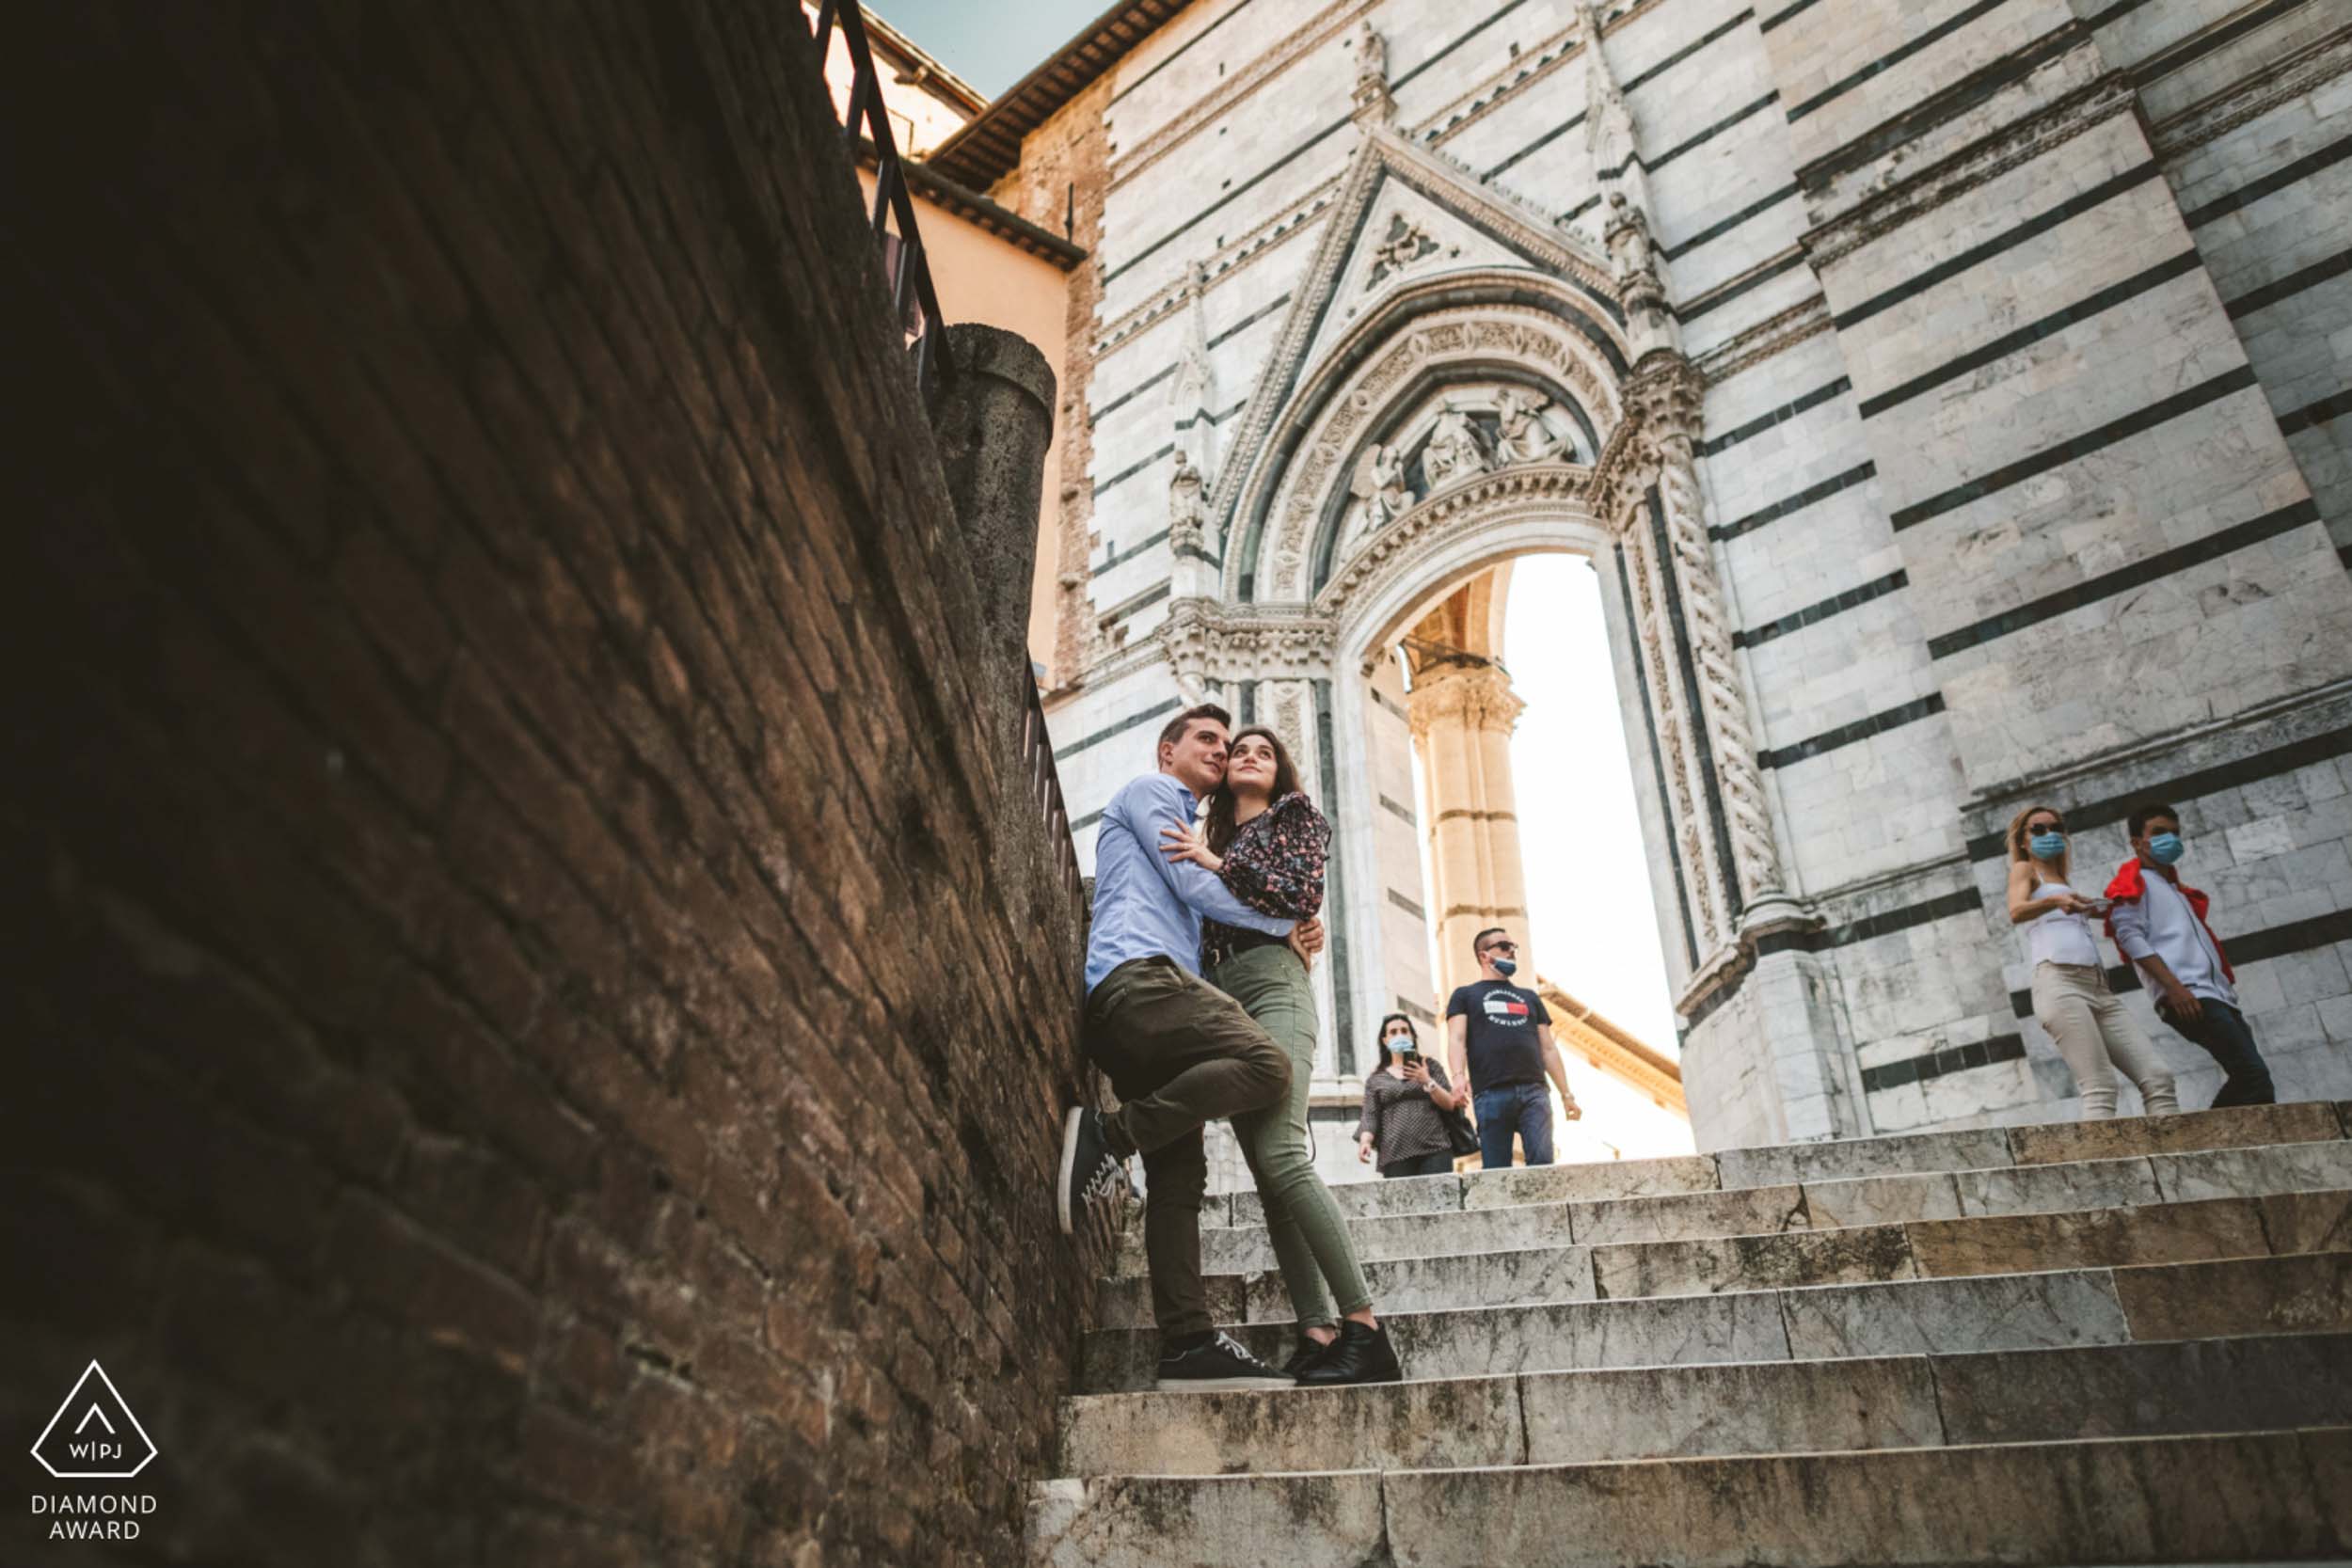 Engagement Photos in Siena, Tuscany.